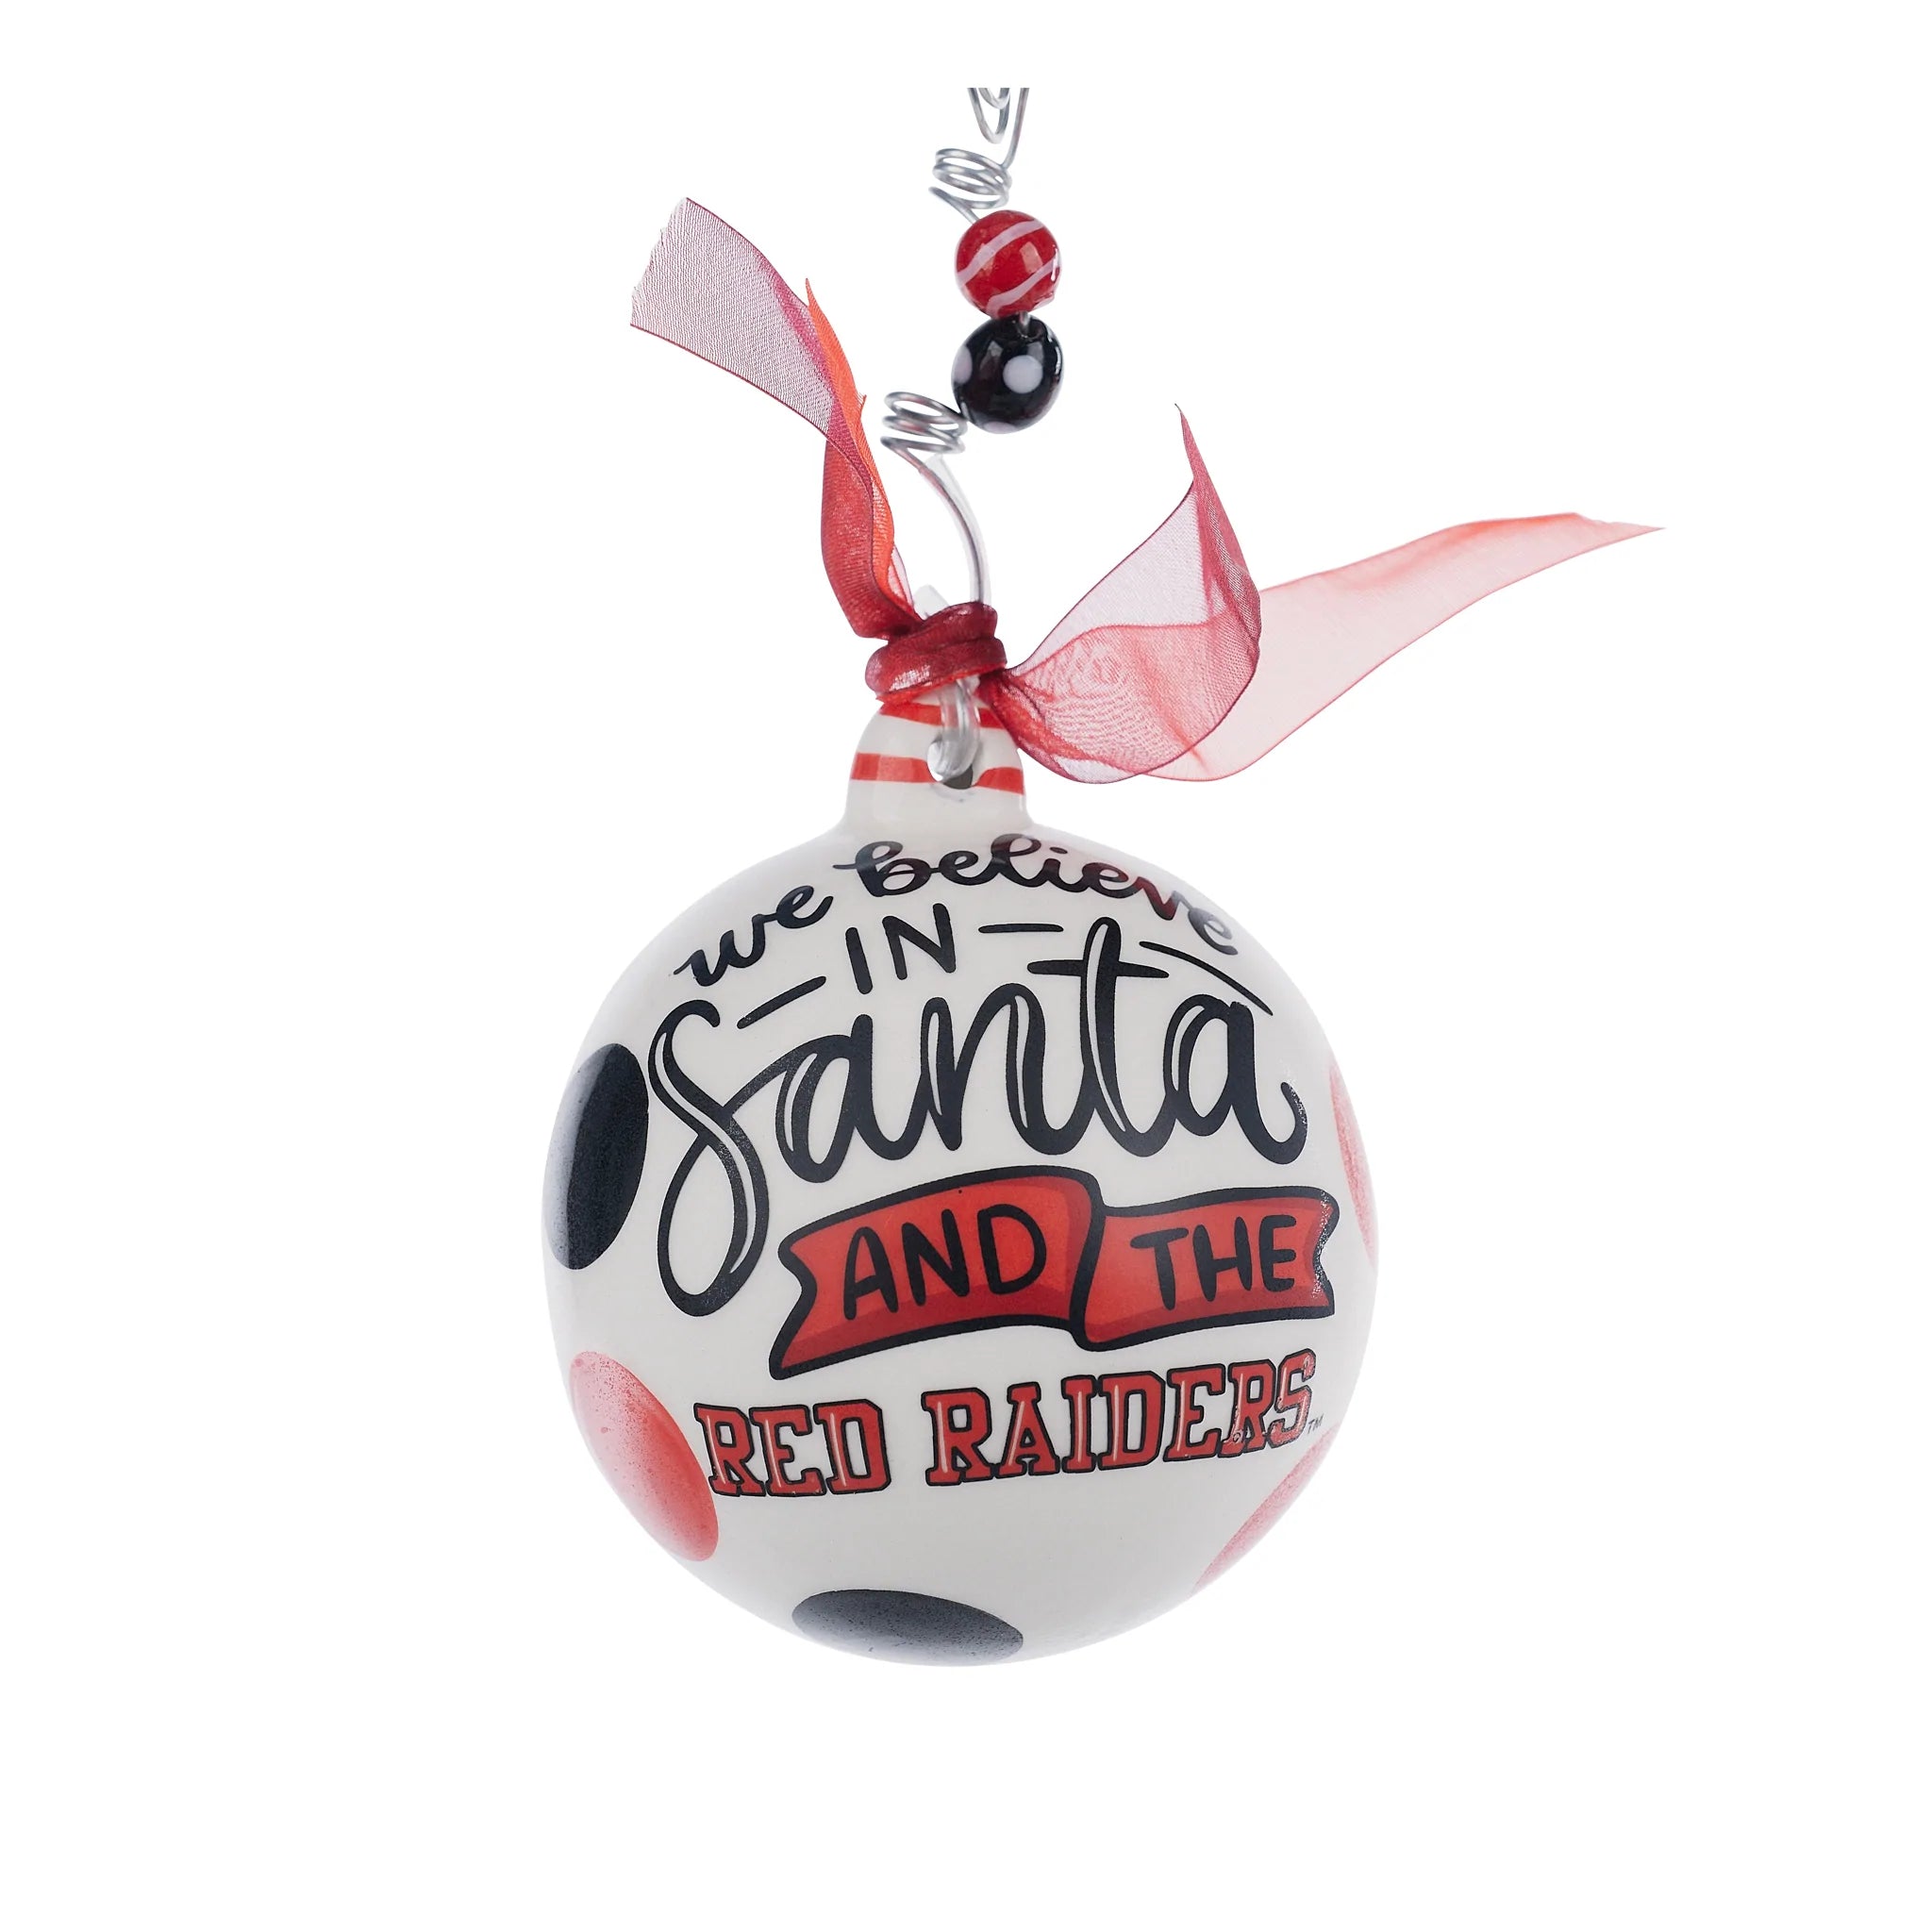 Texas Tech "We Believe in Santa and the Red Raiders" Ceramic Ornament